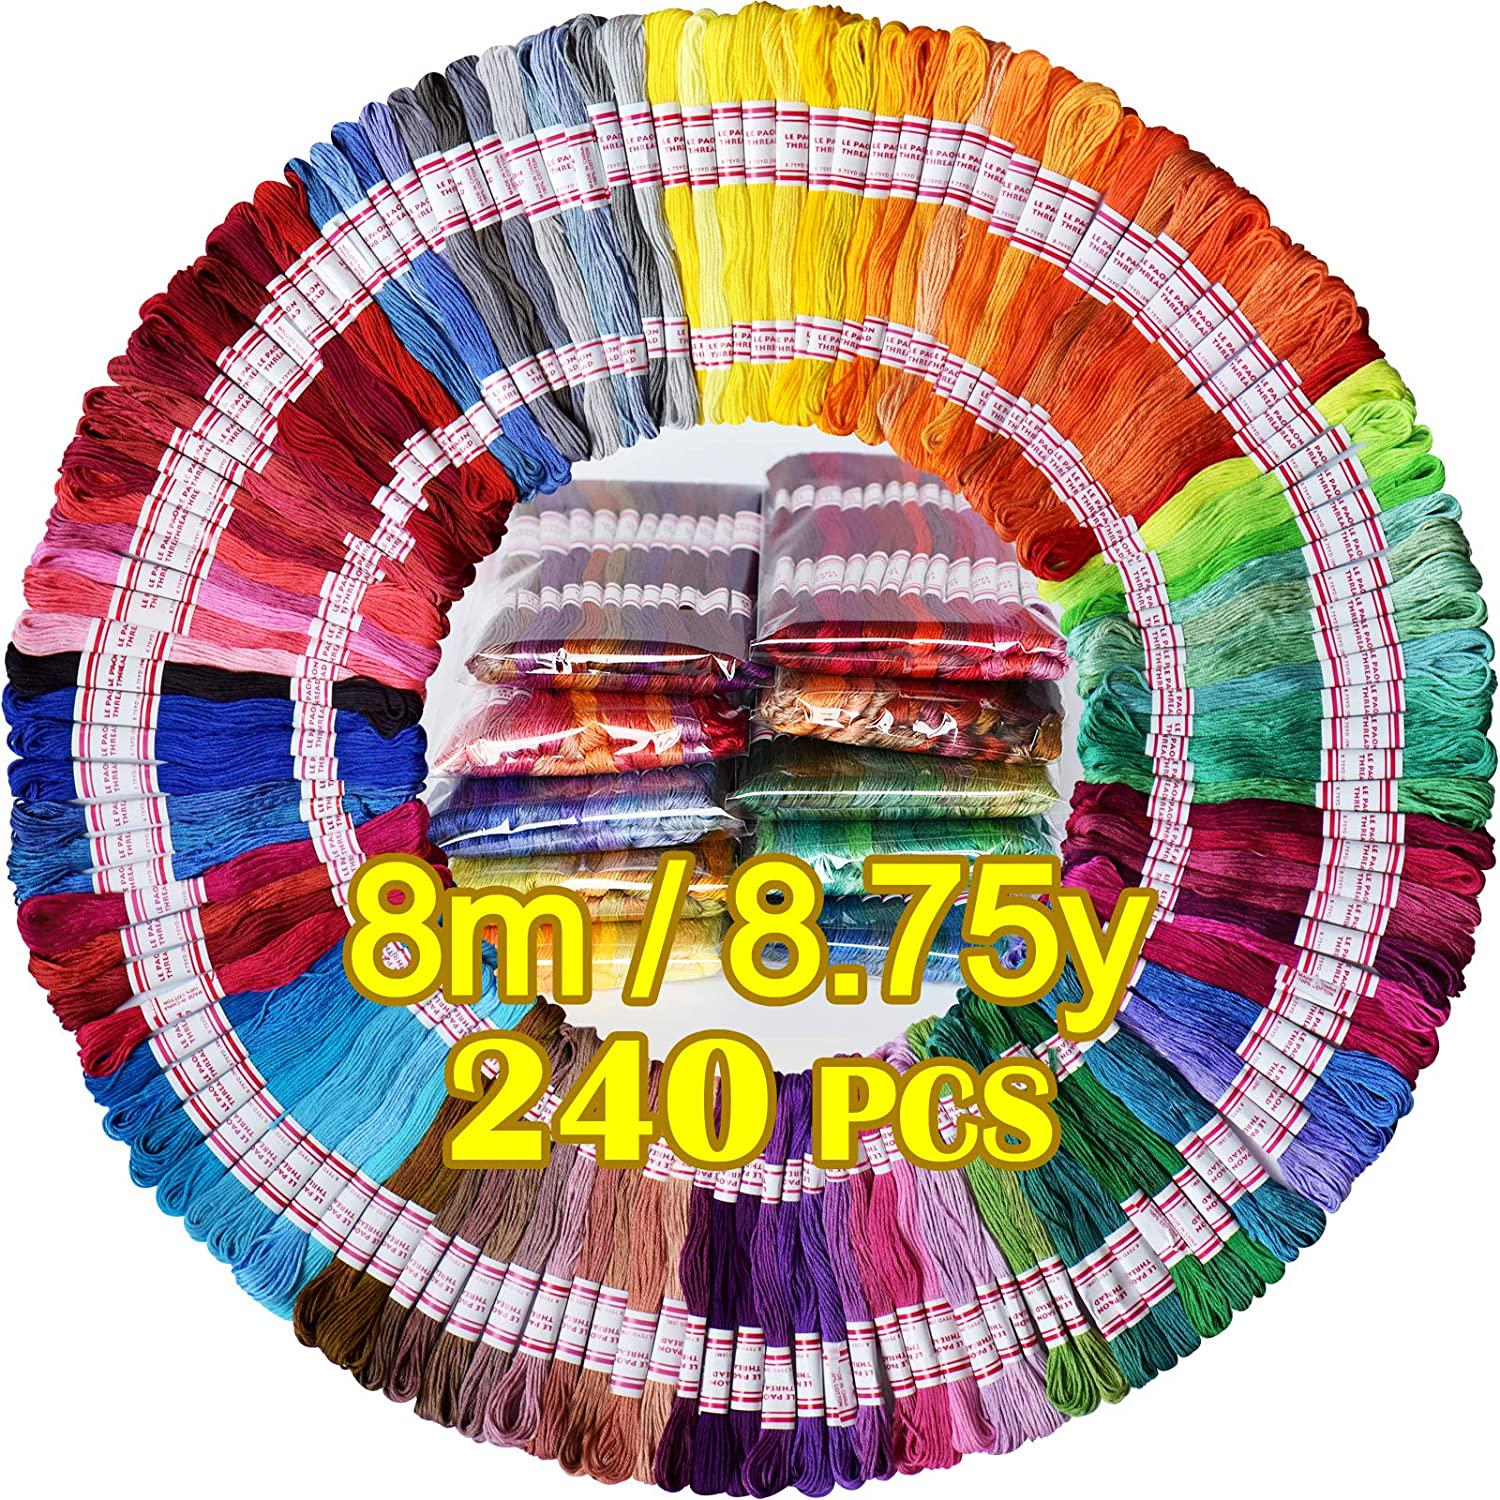 LE PAON, LE PAON 240pcs 1920M Embroidery Floss Egyptian long-staple cotton pull strong bright light the only one DMC 8M/pc 24pcs/bag 10package Cross Stitch Threads Friendship Bracelets Floss